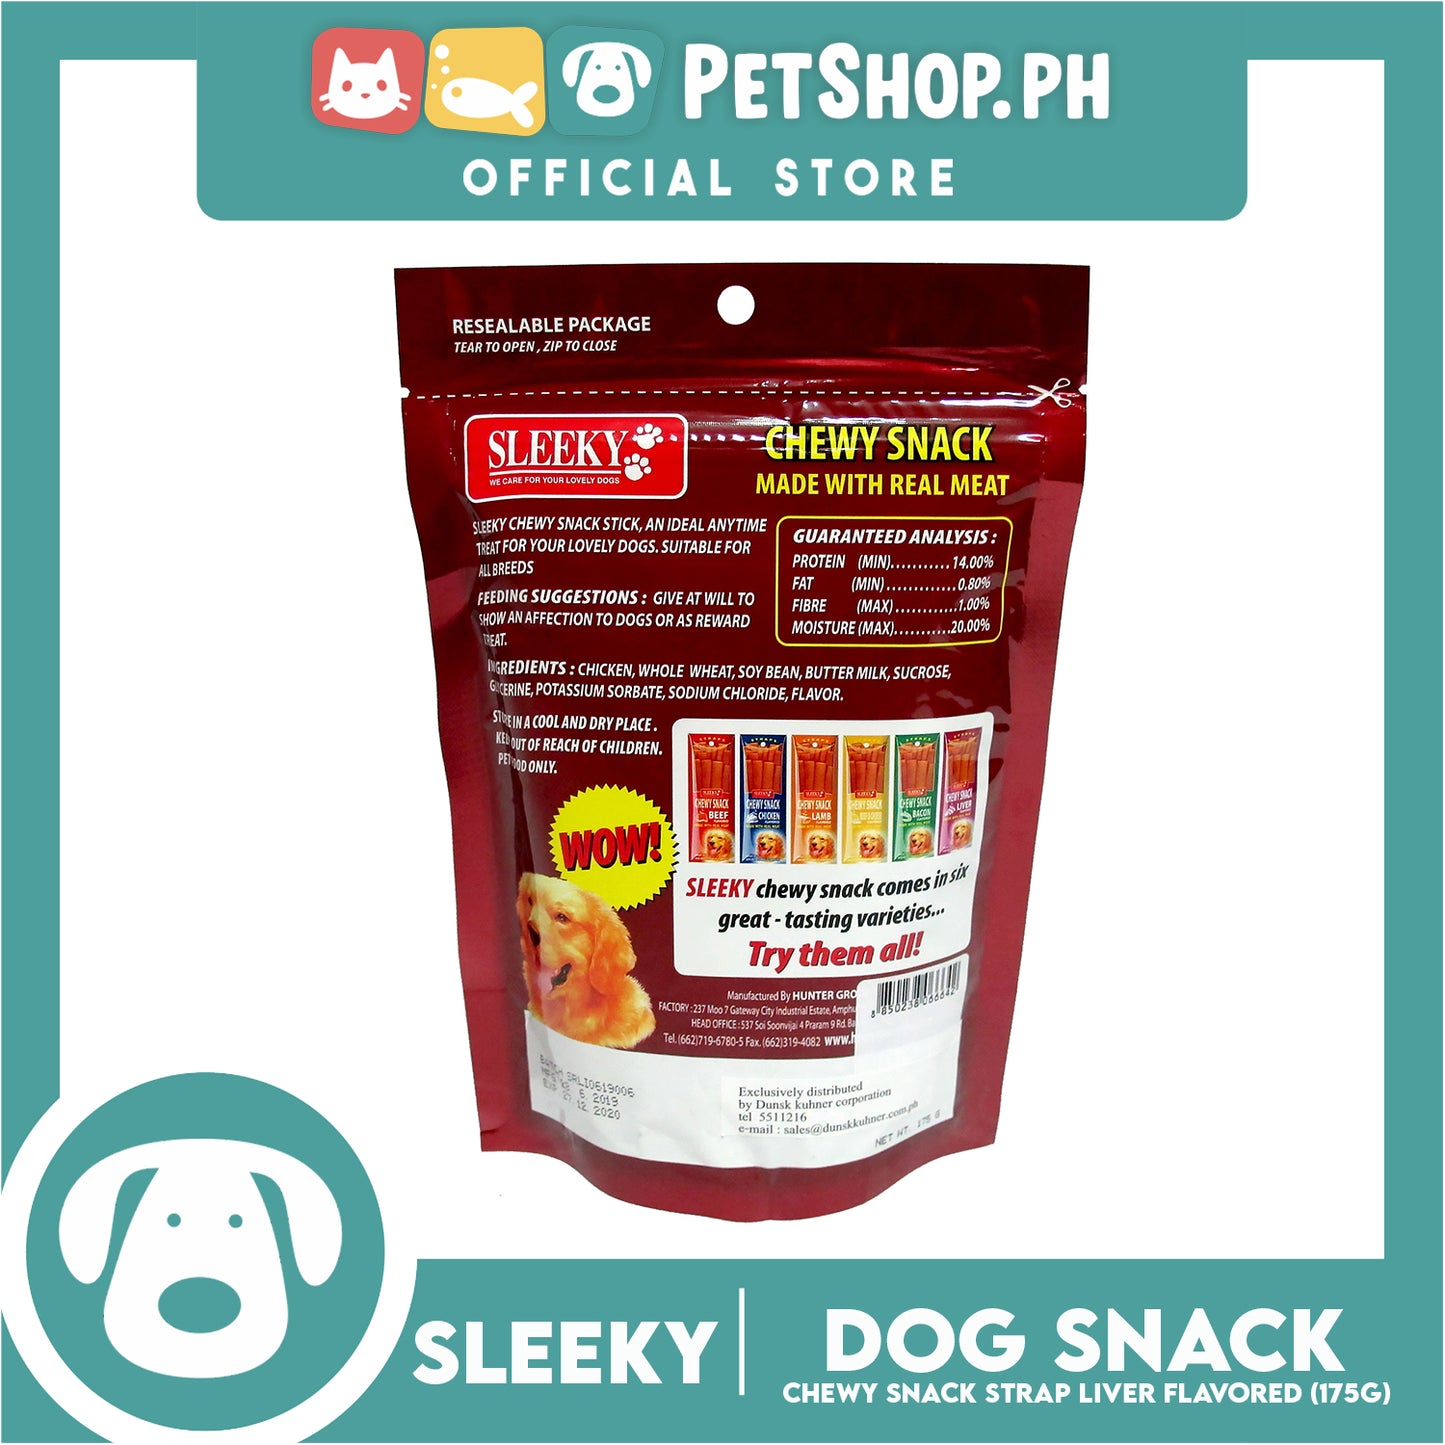 Sleeky Chewy Strap Liver Flavored 175g Dog Treats